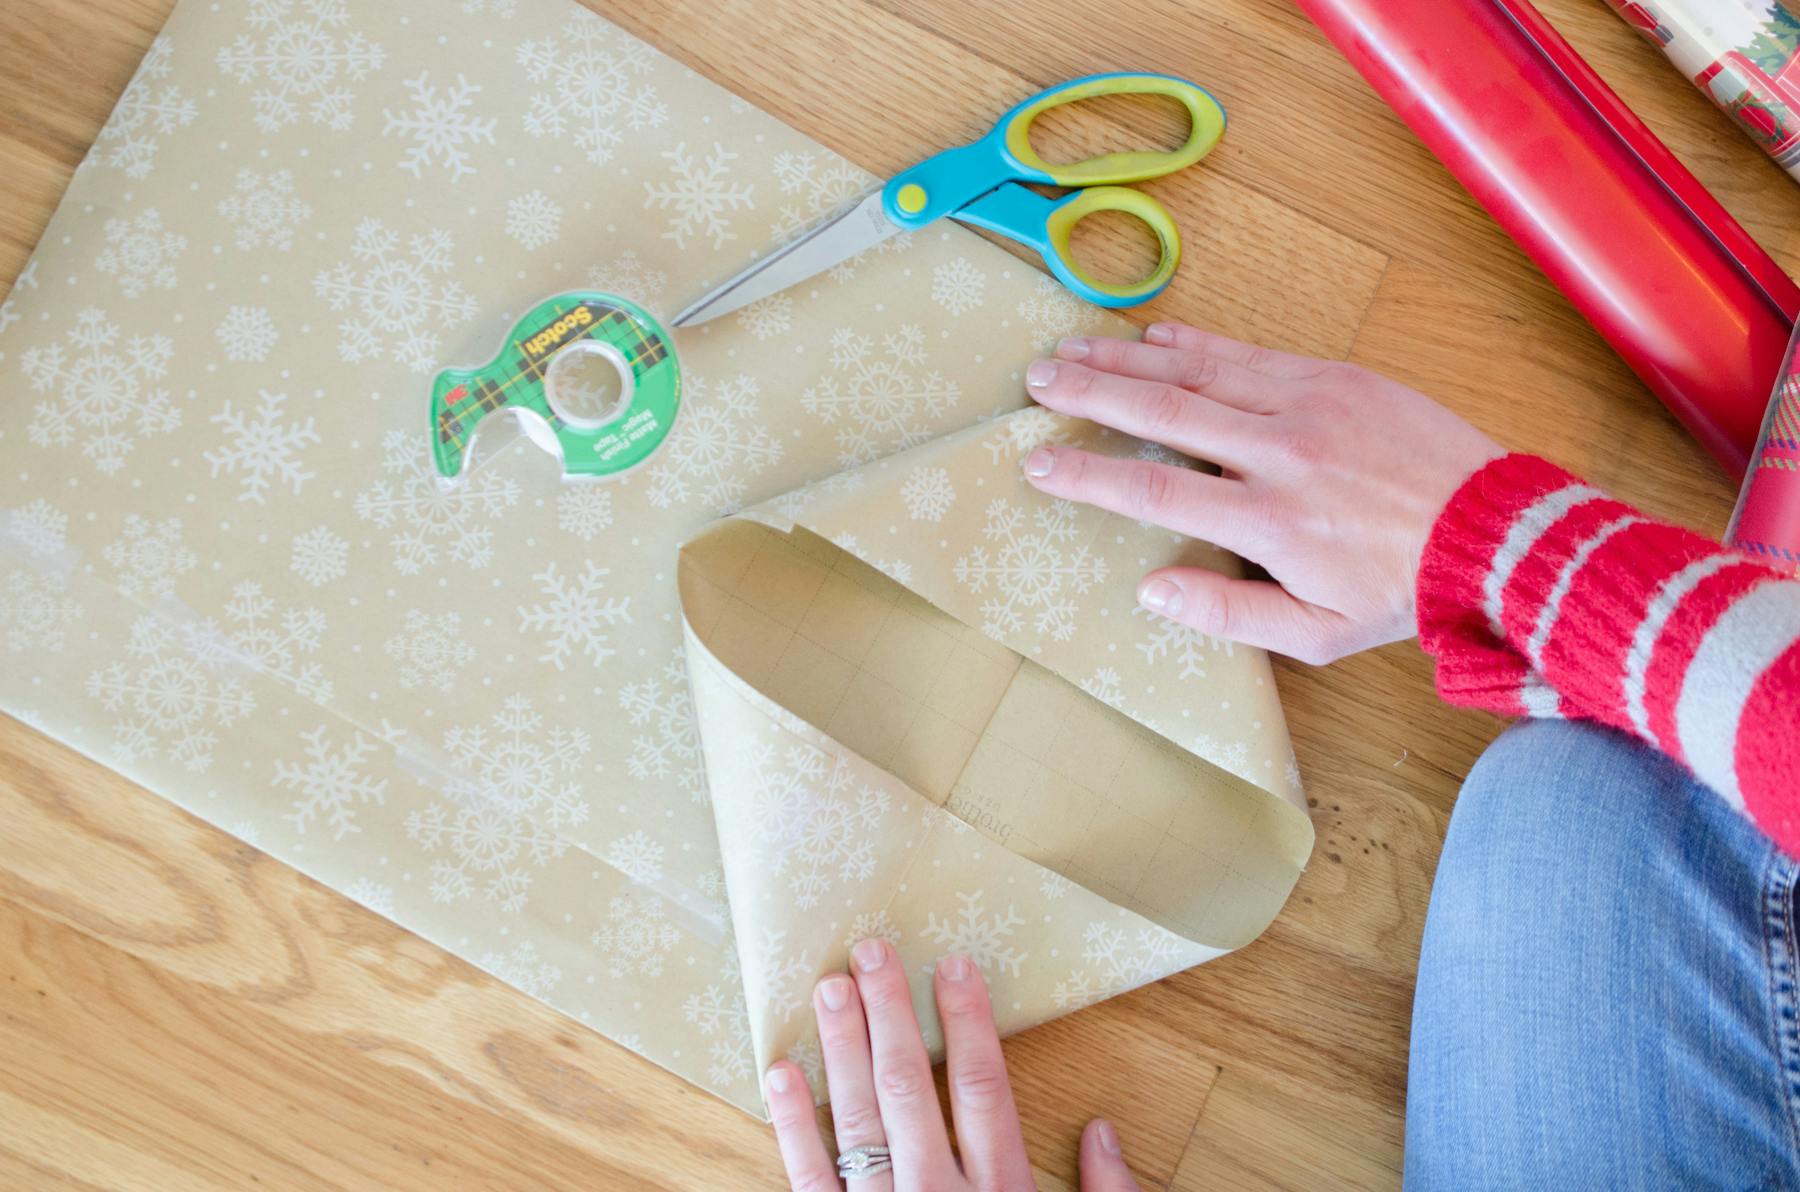 How to Make a Bag Out of Wrapping Paper